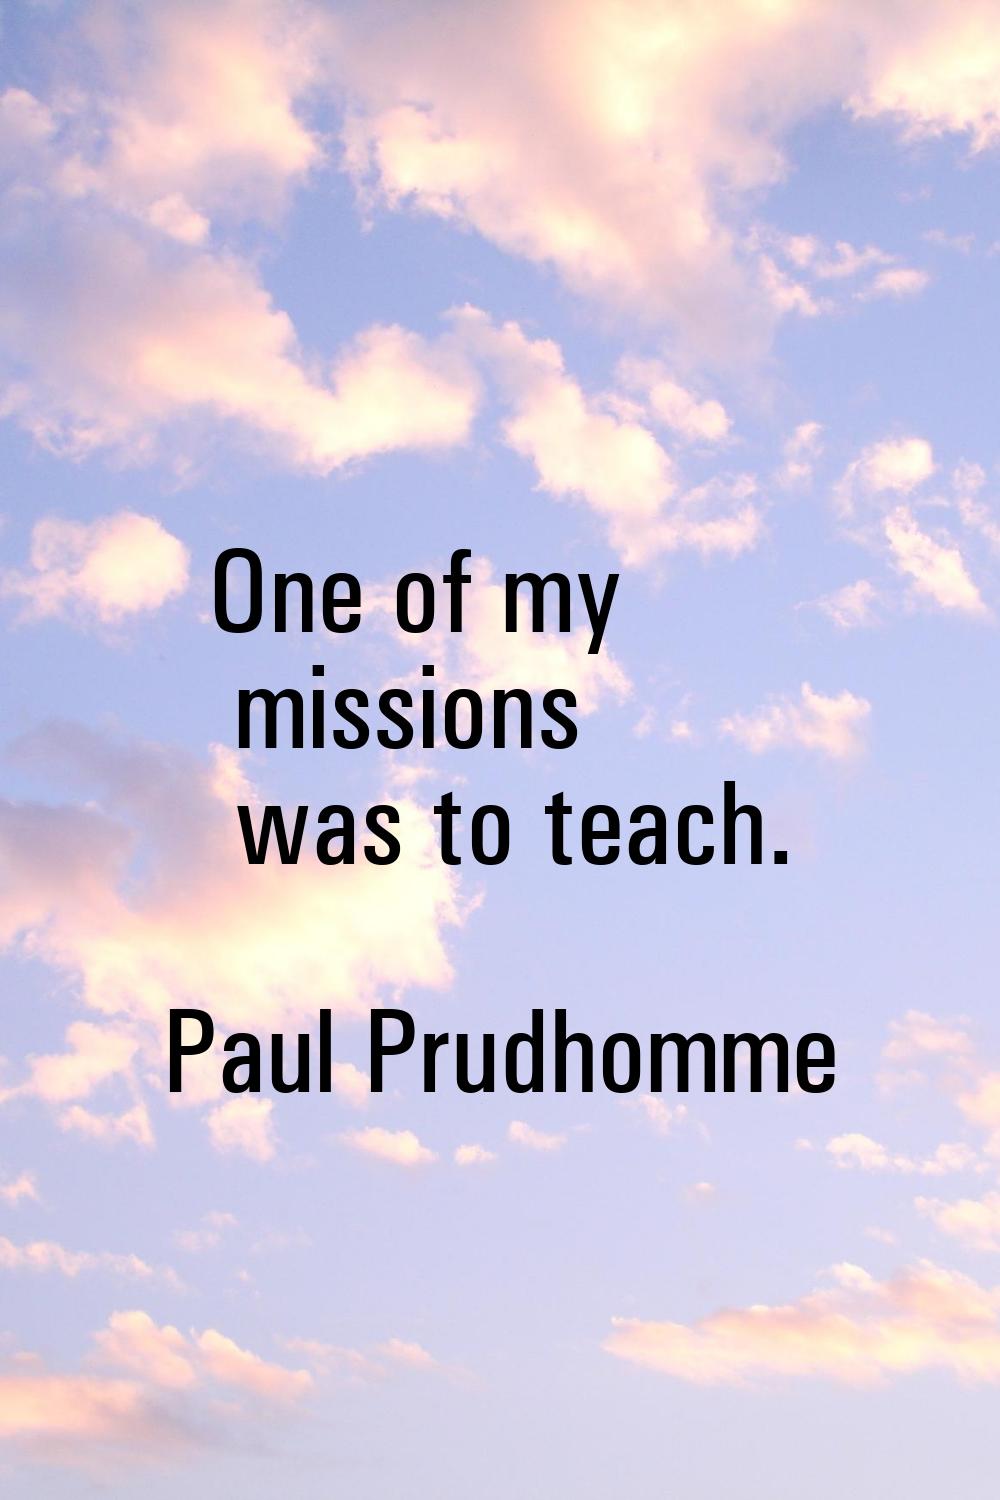 One of my missions was to teach.